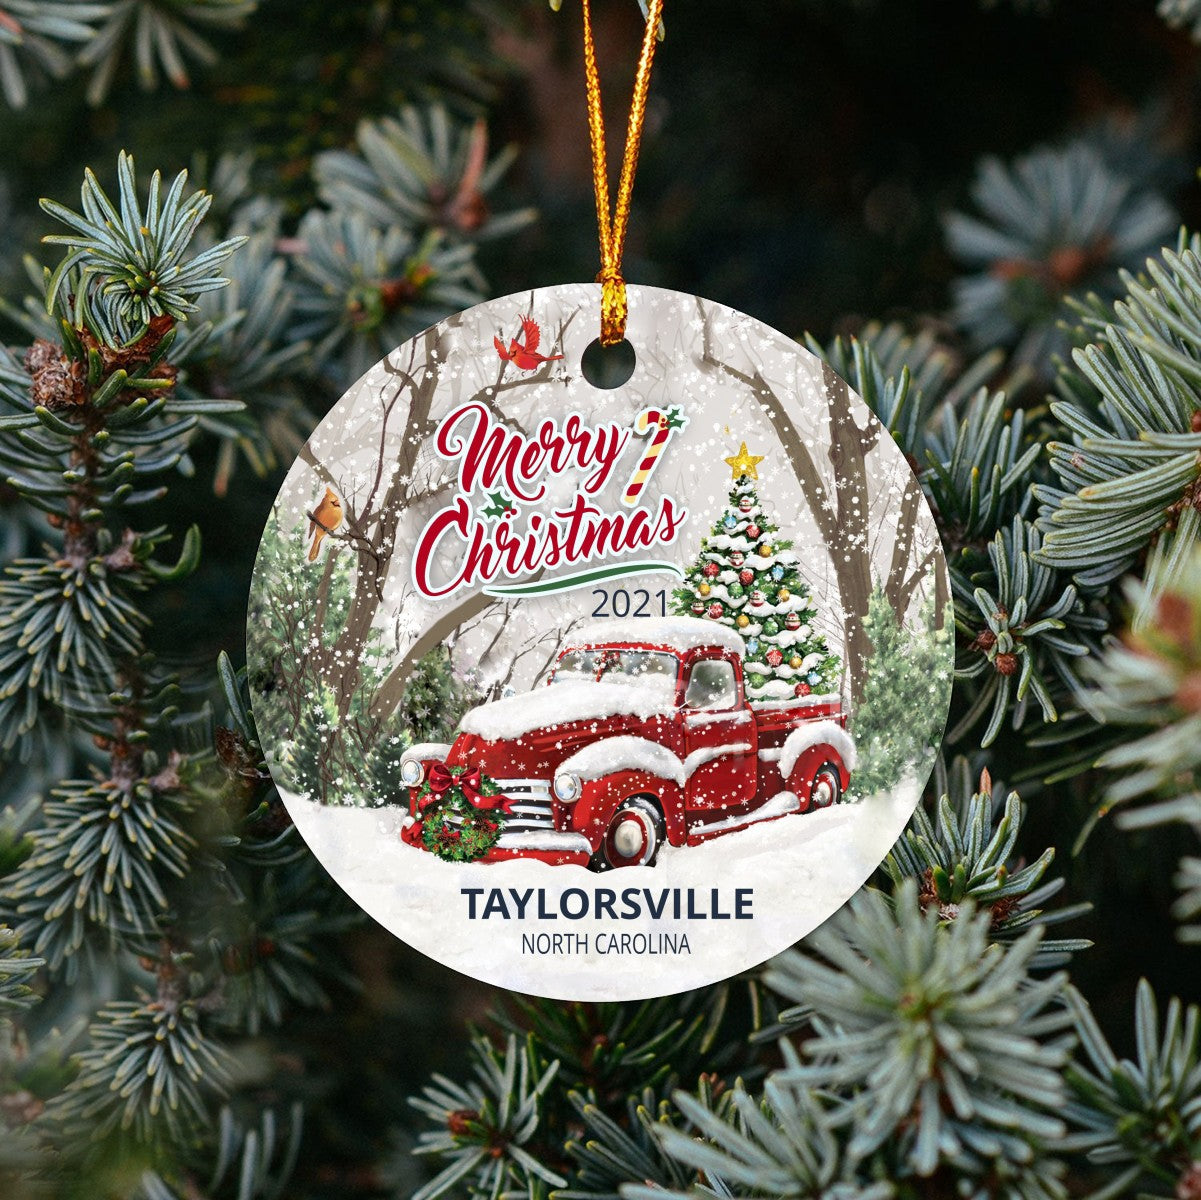 Christmas Tree Ornaments Taylorsville - Ornament Customize With Name City And State Taylorsville North Carolina NC - Red Truck Xmas Ornaments 3'' Plastic Gift For Family, Friend And Housewarming